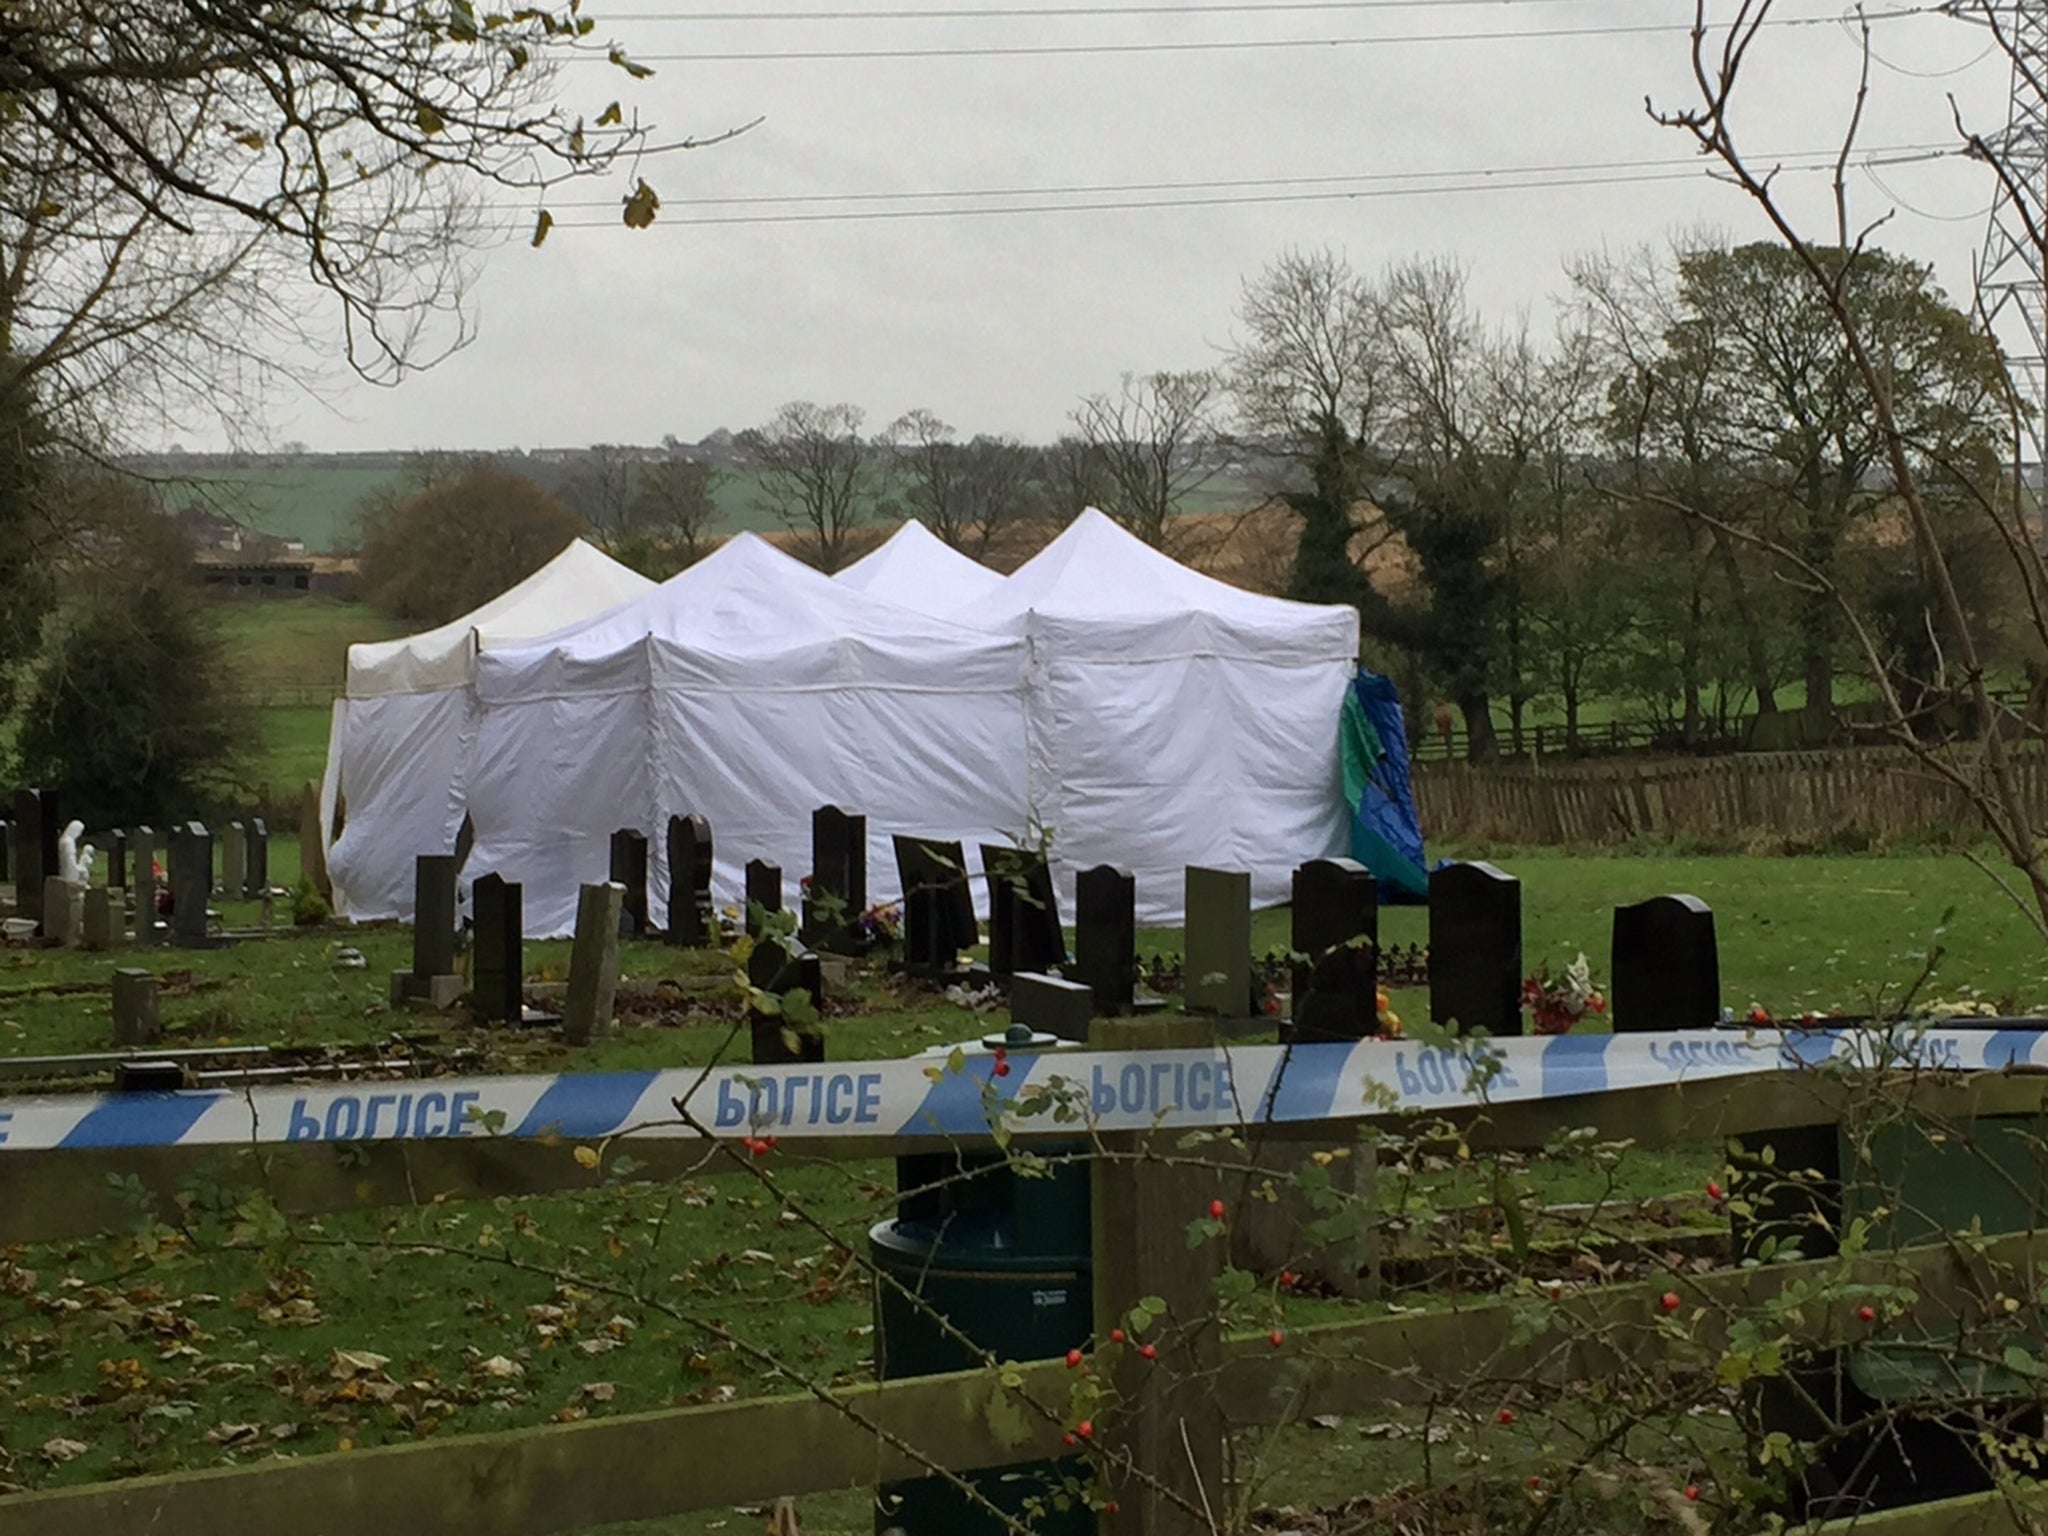 Police were called to a cemetery in Metal Bridge, County Durham, after reports a grave had been disturbed